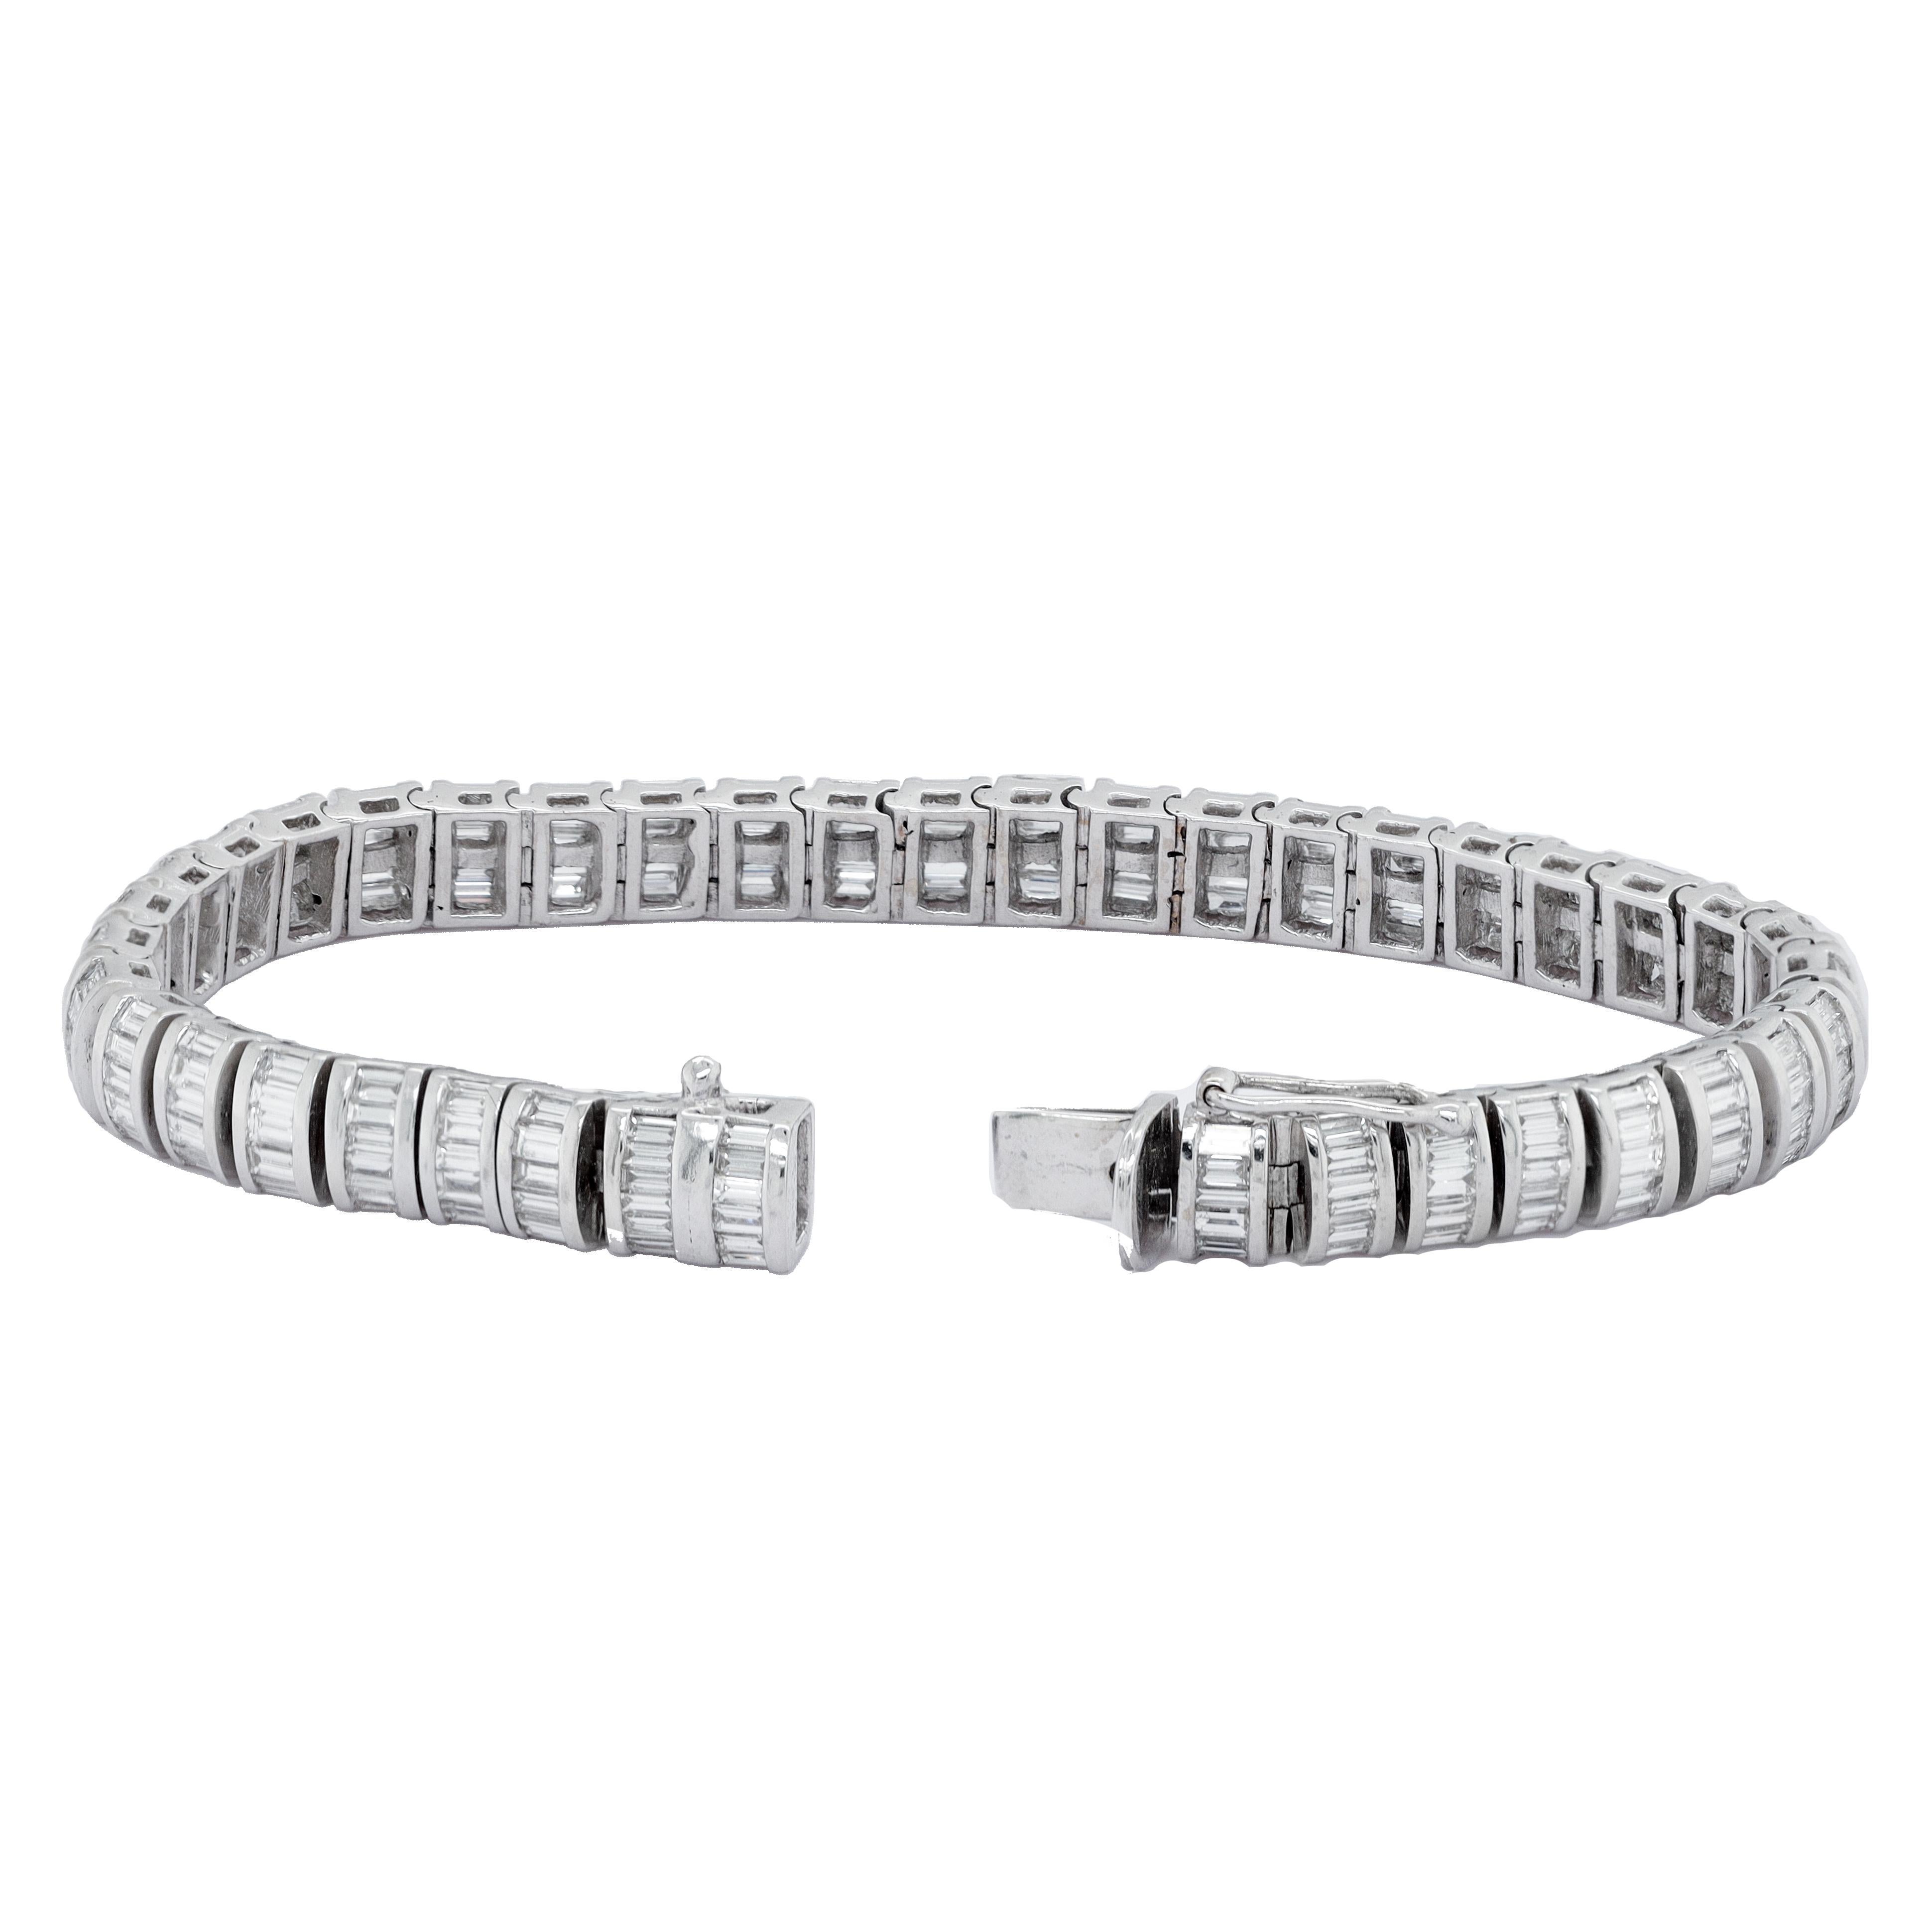 18 kt white gold diamond tennis bracelet adorned with 8.41 cts tw of horizontally channel set baguette cut diamonds (VS clarity)
Diana M. is a leading supplier of top-quality fine jewelry for over 35 years.
Diana M is one-stop shop for all your